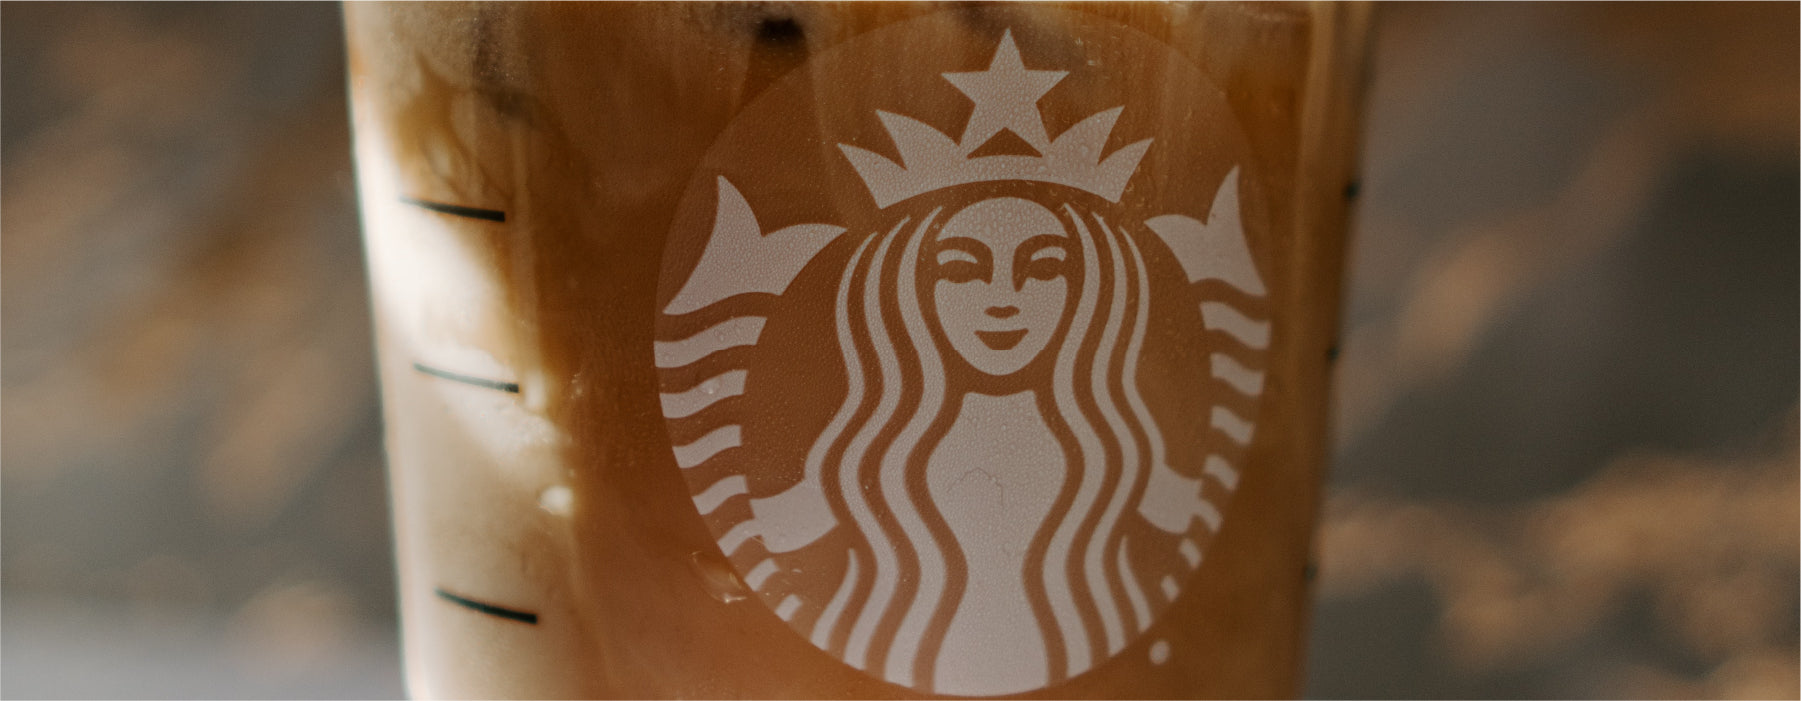 How to Make Starbucks Drinks at Home - The Coffee Life, a blog by EspressoWorks